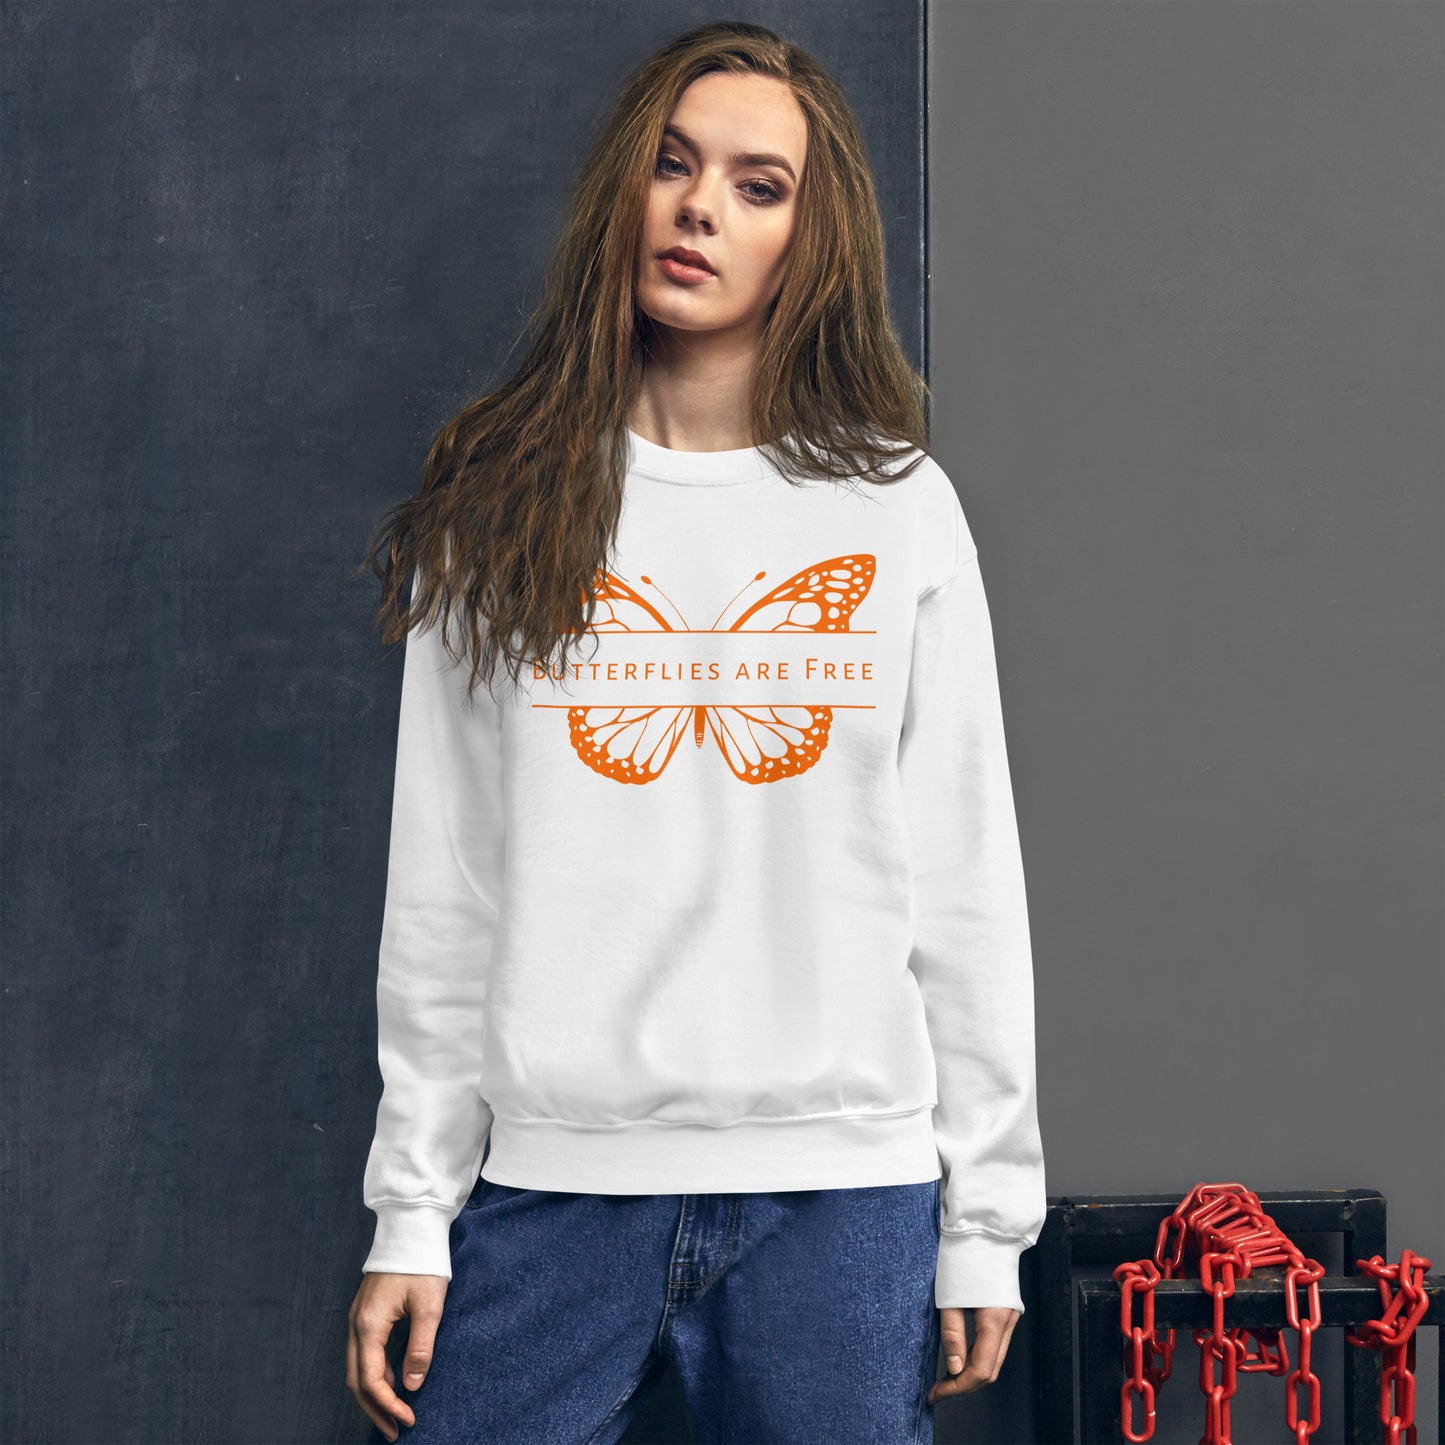 Butterflies Are Free Unisex Sweatshirt, Positive Inspirational Message, Be Free, Live Life as You Wish